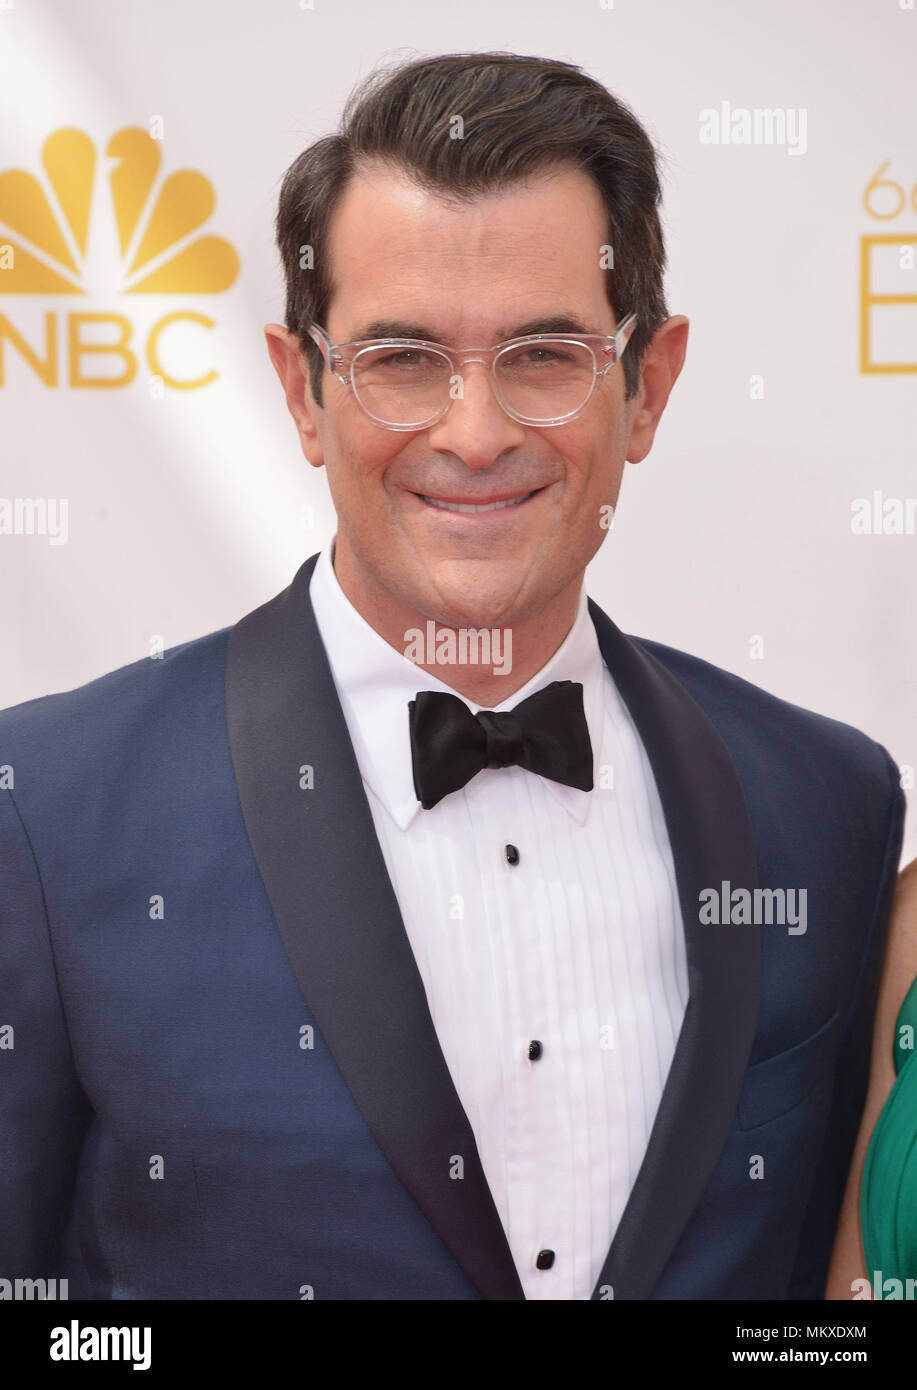 Ty Burrell  at the  66th Emmy Awards 2014 at the Nokia Center in Los Angeles.Ty Burrell  Red Carpet Event, Vertical, USA, Film Industry, Celebrities,  Photography, Bestof, Arts Culture and Entertainment, Topix Celebrities fashion /  Vertical, Best of, Event in Hollywood Life - California,  Red Carpet and backstage, USA, Film Industry, Celebrities,  movie celebrities, TV celebrities, Music celebrities, Photography, Bestof, Arts Culture and Entertainment,  Topix, headshot, vertical, one person,, from the year , 2014, inquiry tsuni@Gamma-USA.com Stock Photo